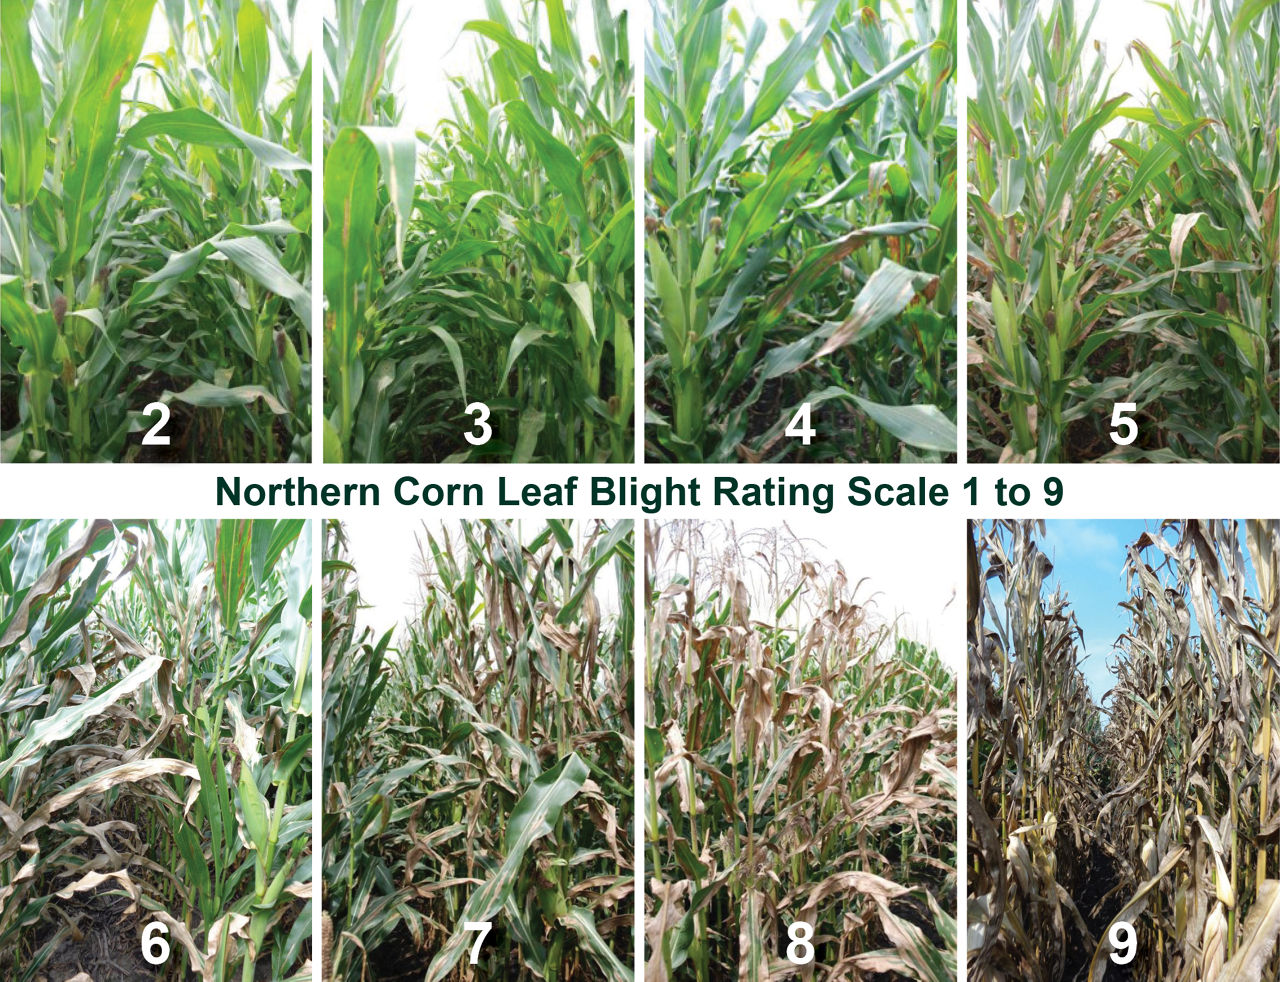 Example of foliar disease rating scale showing severity of northern corn leaf blight with 1 denoting few lesions on lower leaves; 3 light infection with lesions on lower leaves; 5 moderate infection lesions on lower and middle leaves; 7 lesions on lower leaves extending to upper leaves; and 9 very heavy infection lesions on all leaves and plant may be prematurely killed. 